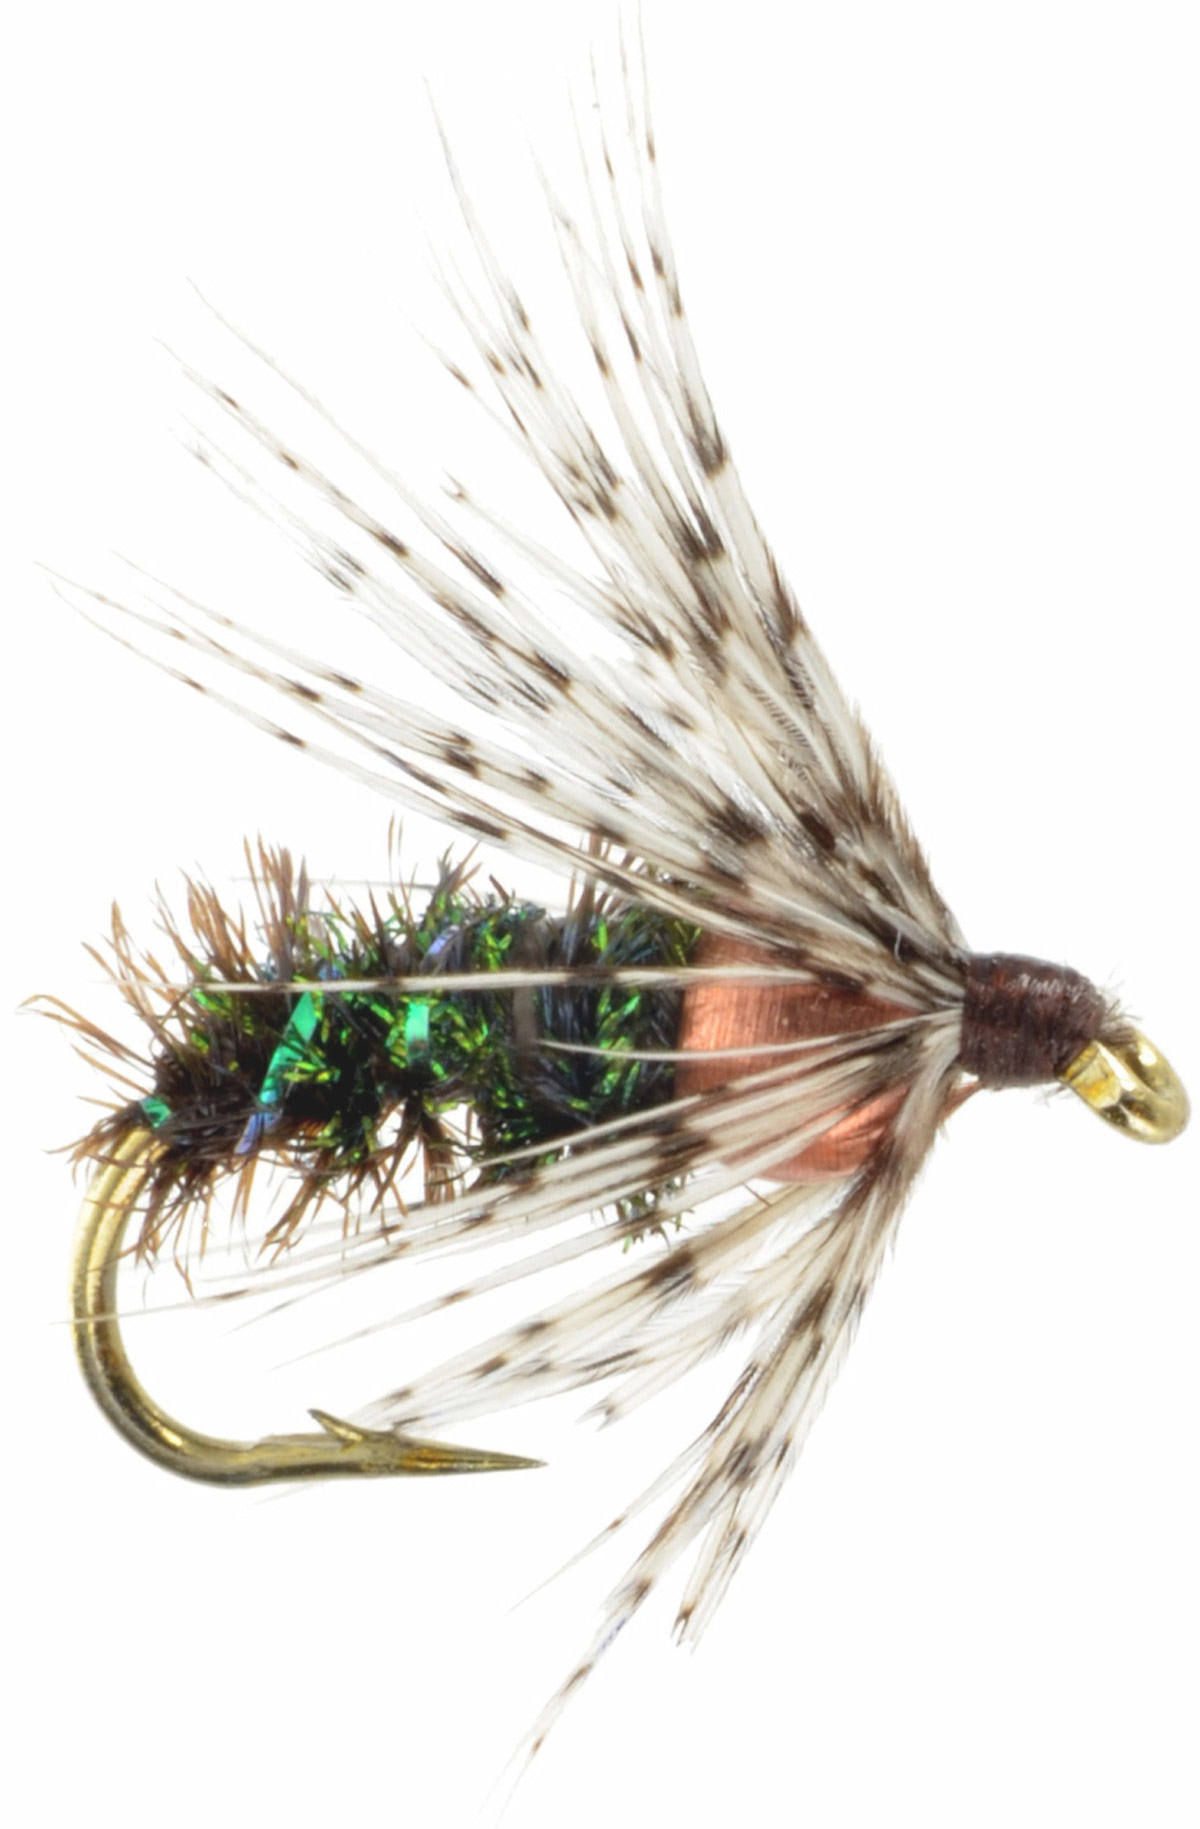 Blue Needle Peacock Soft Hackle wet fly Hook: TMC 103BL No.11 Body